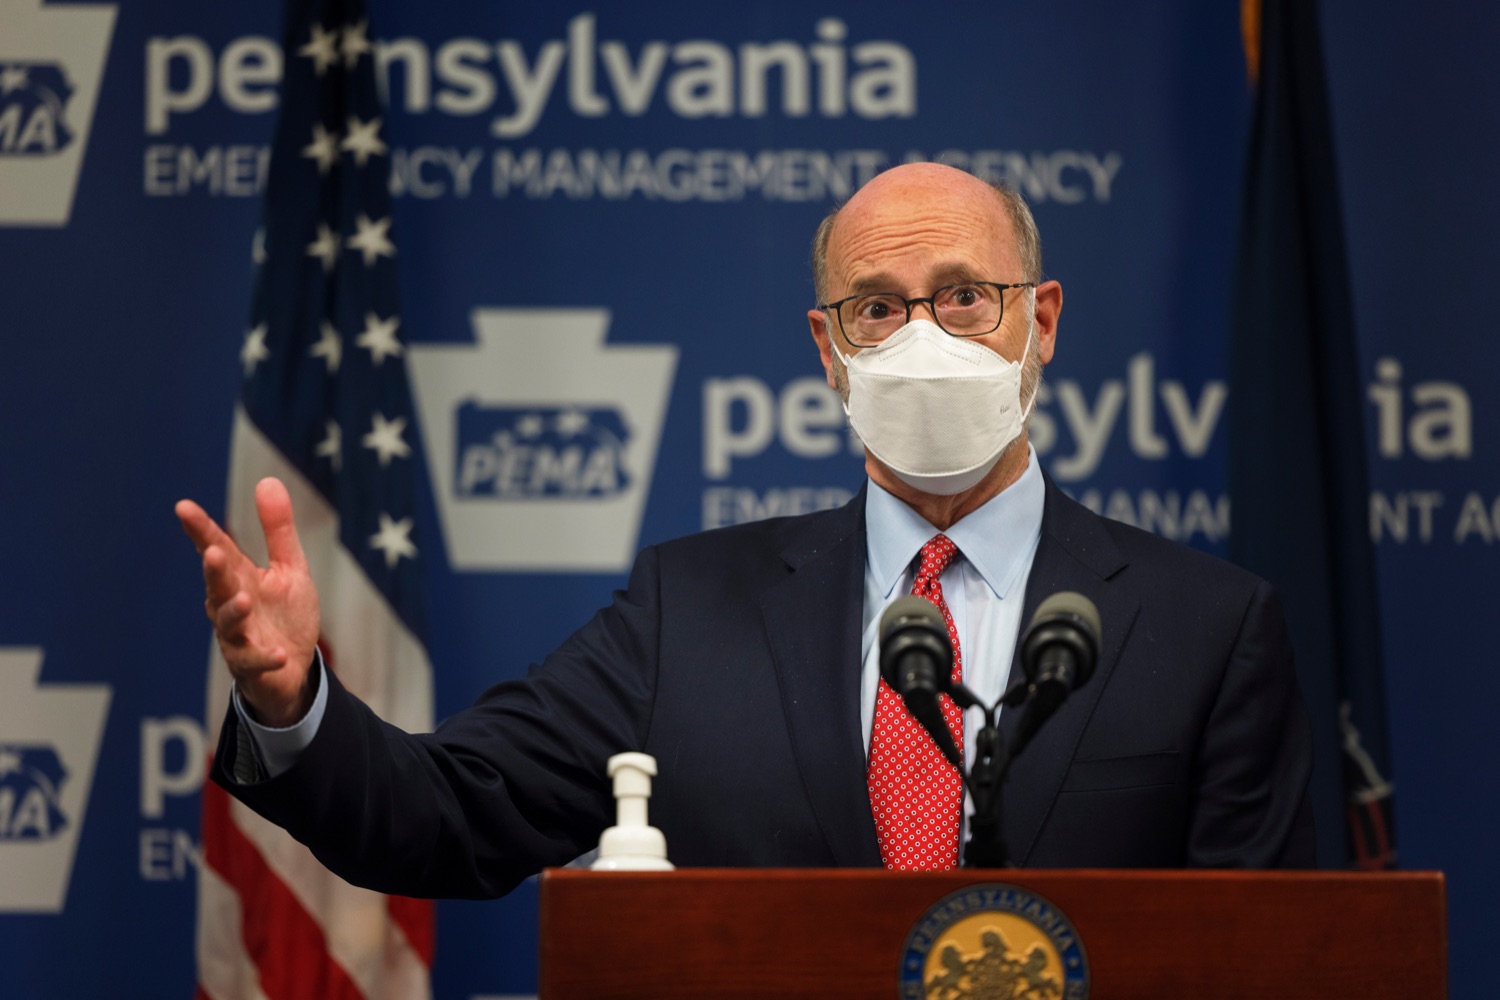 Governor Tom Wolf speaks during a press conference, which discussed the current state of COVID-19 and a new Secretary of Health order requiring masks to be worn inside K-12 school buildings, early learning programs and child care providers, inside Pennsylvania Emergency Management Agency in Harrisburg on Tuesday, August 31, 2021.<br><a href="https://filesource.amperwave.net/commonwealthofpa/photo/19089_GOV_School_Masking_NK_001.jpg" target="_blank">⇣ Download Photo</a>